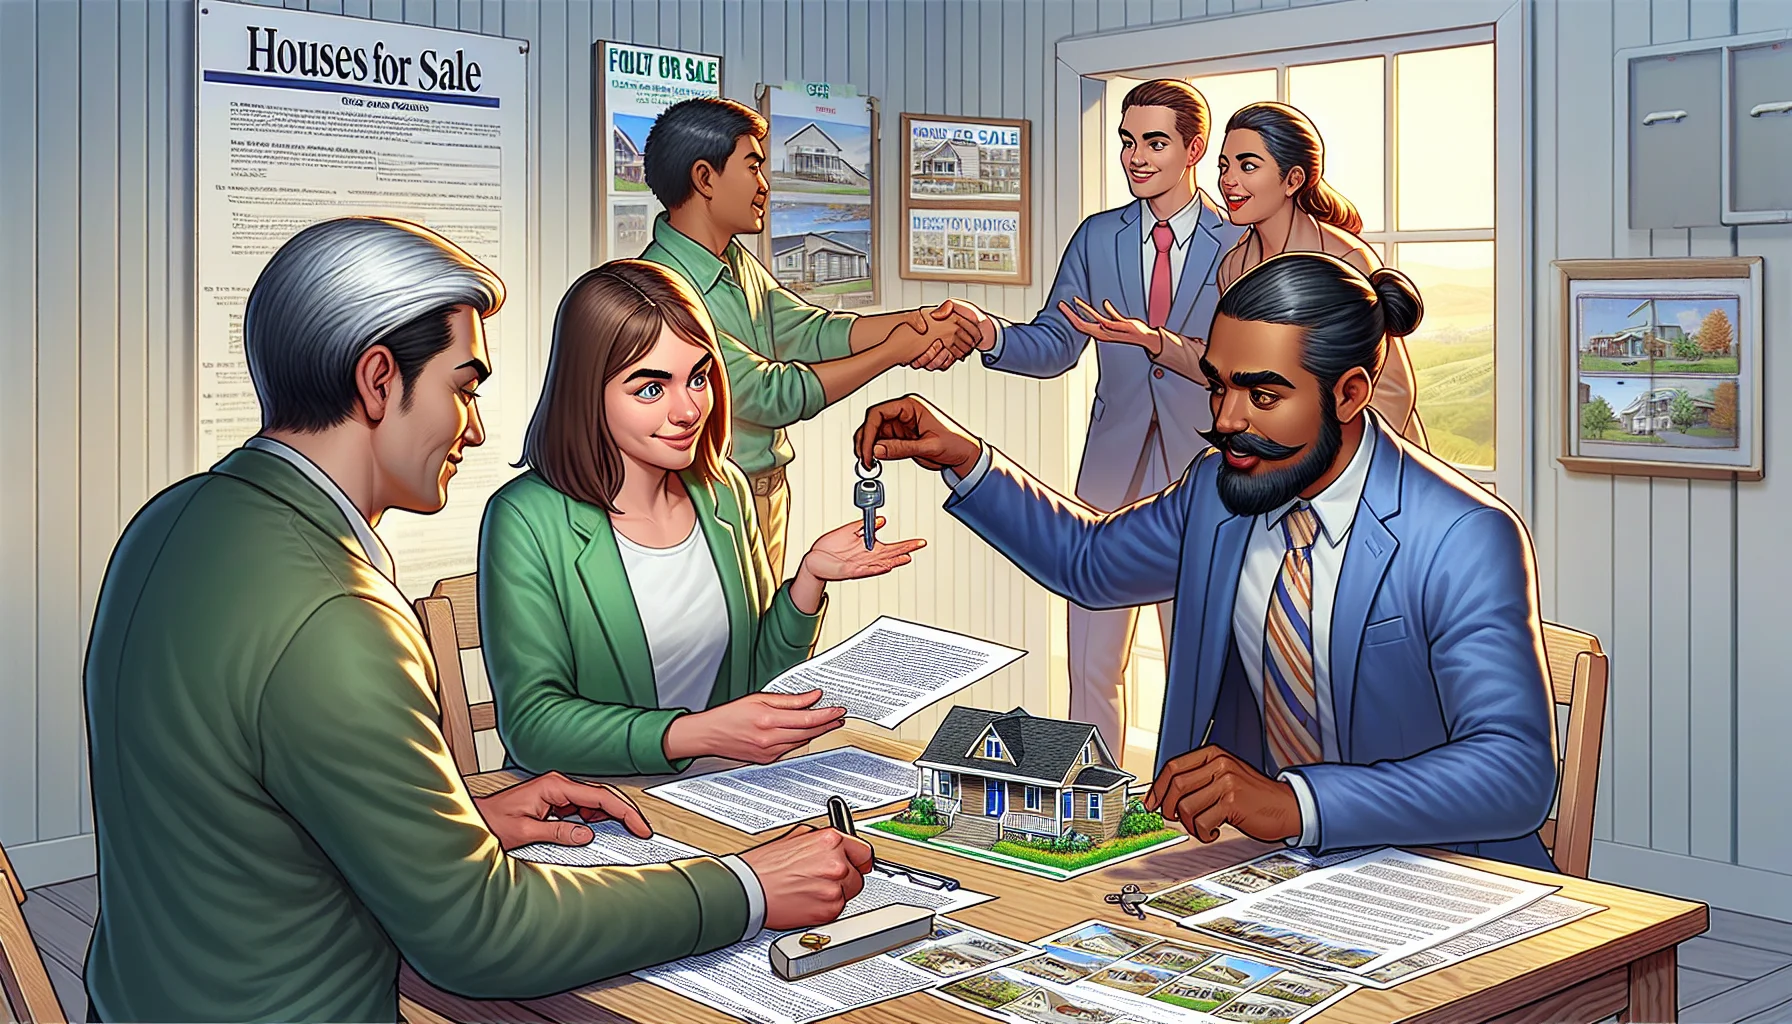 Illustrate an amusing yet believable situation where a Caucasian woman is signing papers for a new home purchase with a South Asian male real estate agent. At the same time, this woman hands over the keys to her current house to an eager Hispanic couple, indicating that they are preparing to rent it. The setting should be an idealized and bustling real estate office, complete with a 'Houses for Sale' board, property brochures, and floor plans strewn around, making it evident that the scenario is in regards to real estate.